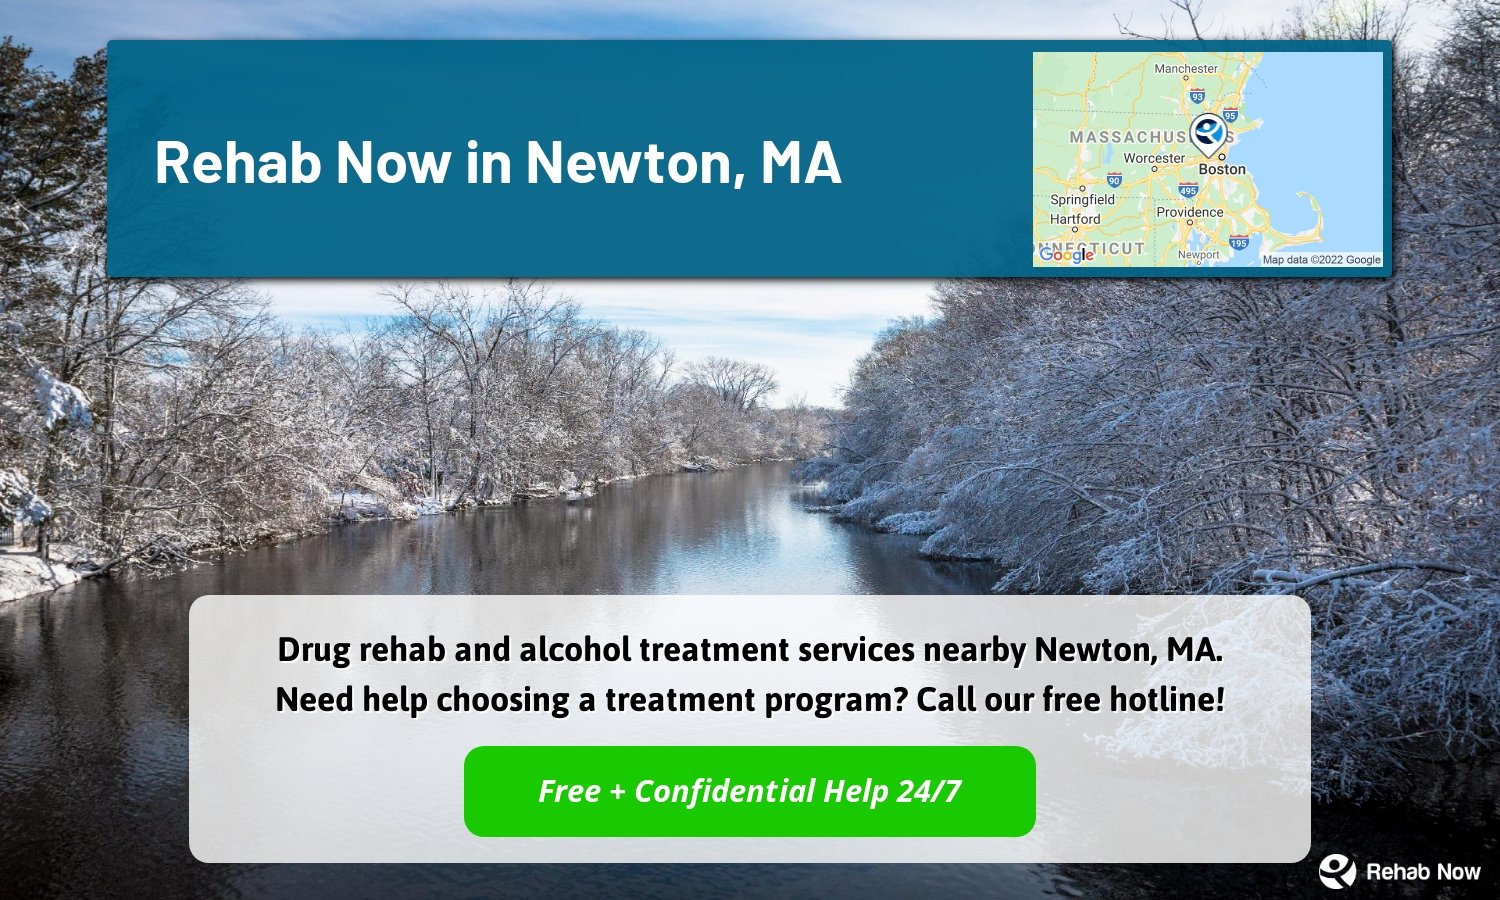 Drug rehab and alcohol treatment services nearby Newton, MA. Need help choosing a treatment program? Call our free hotline!